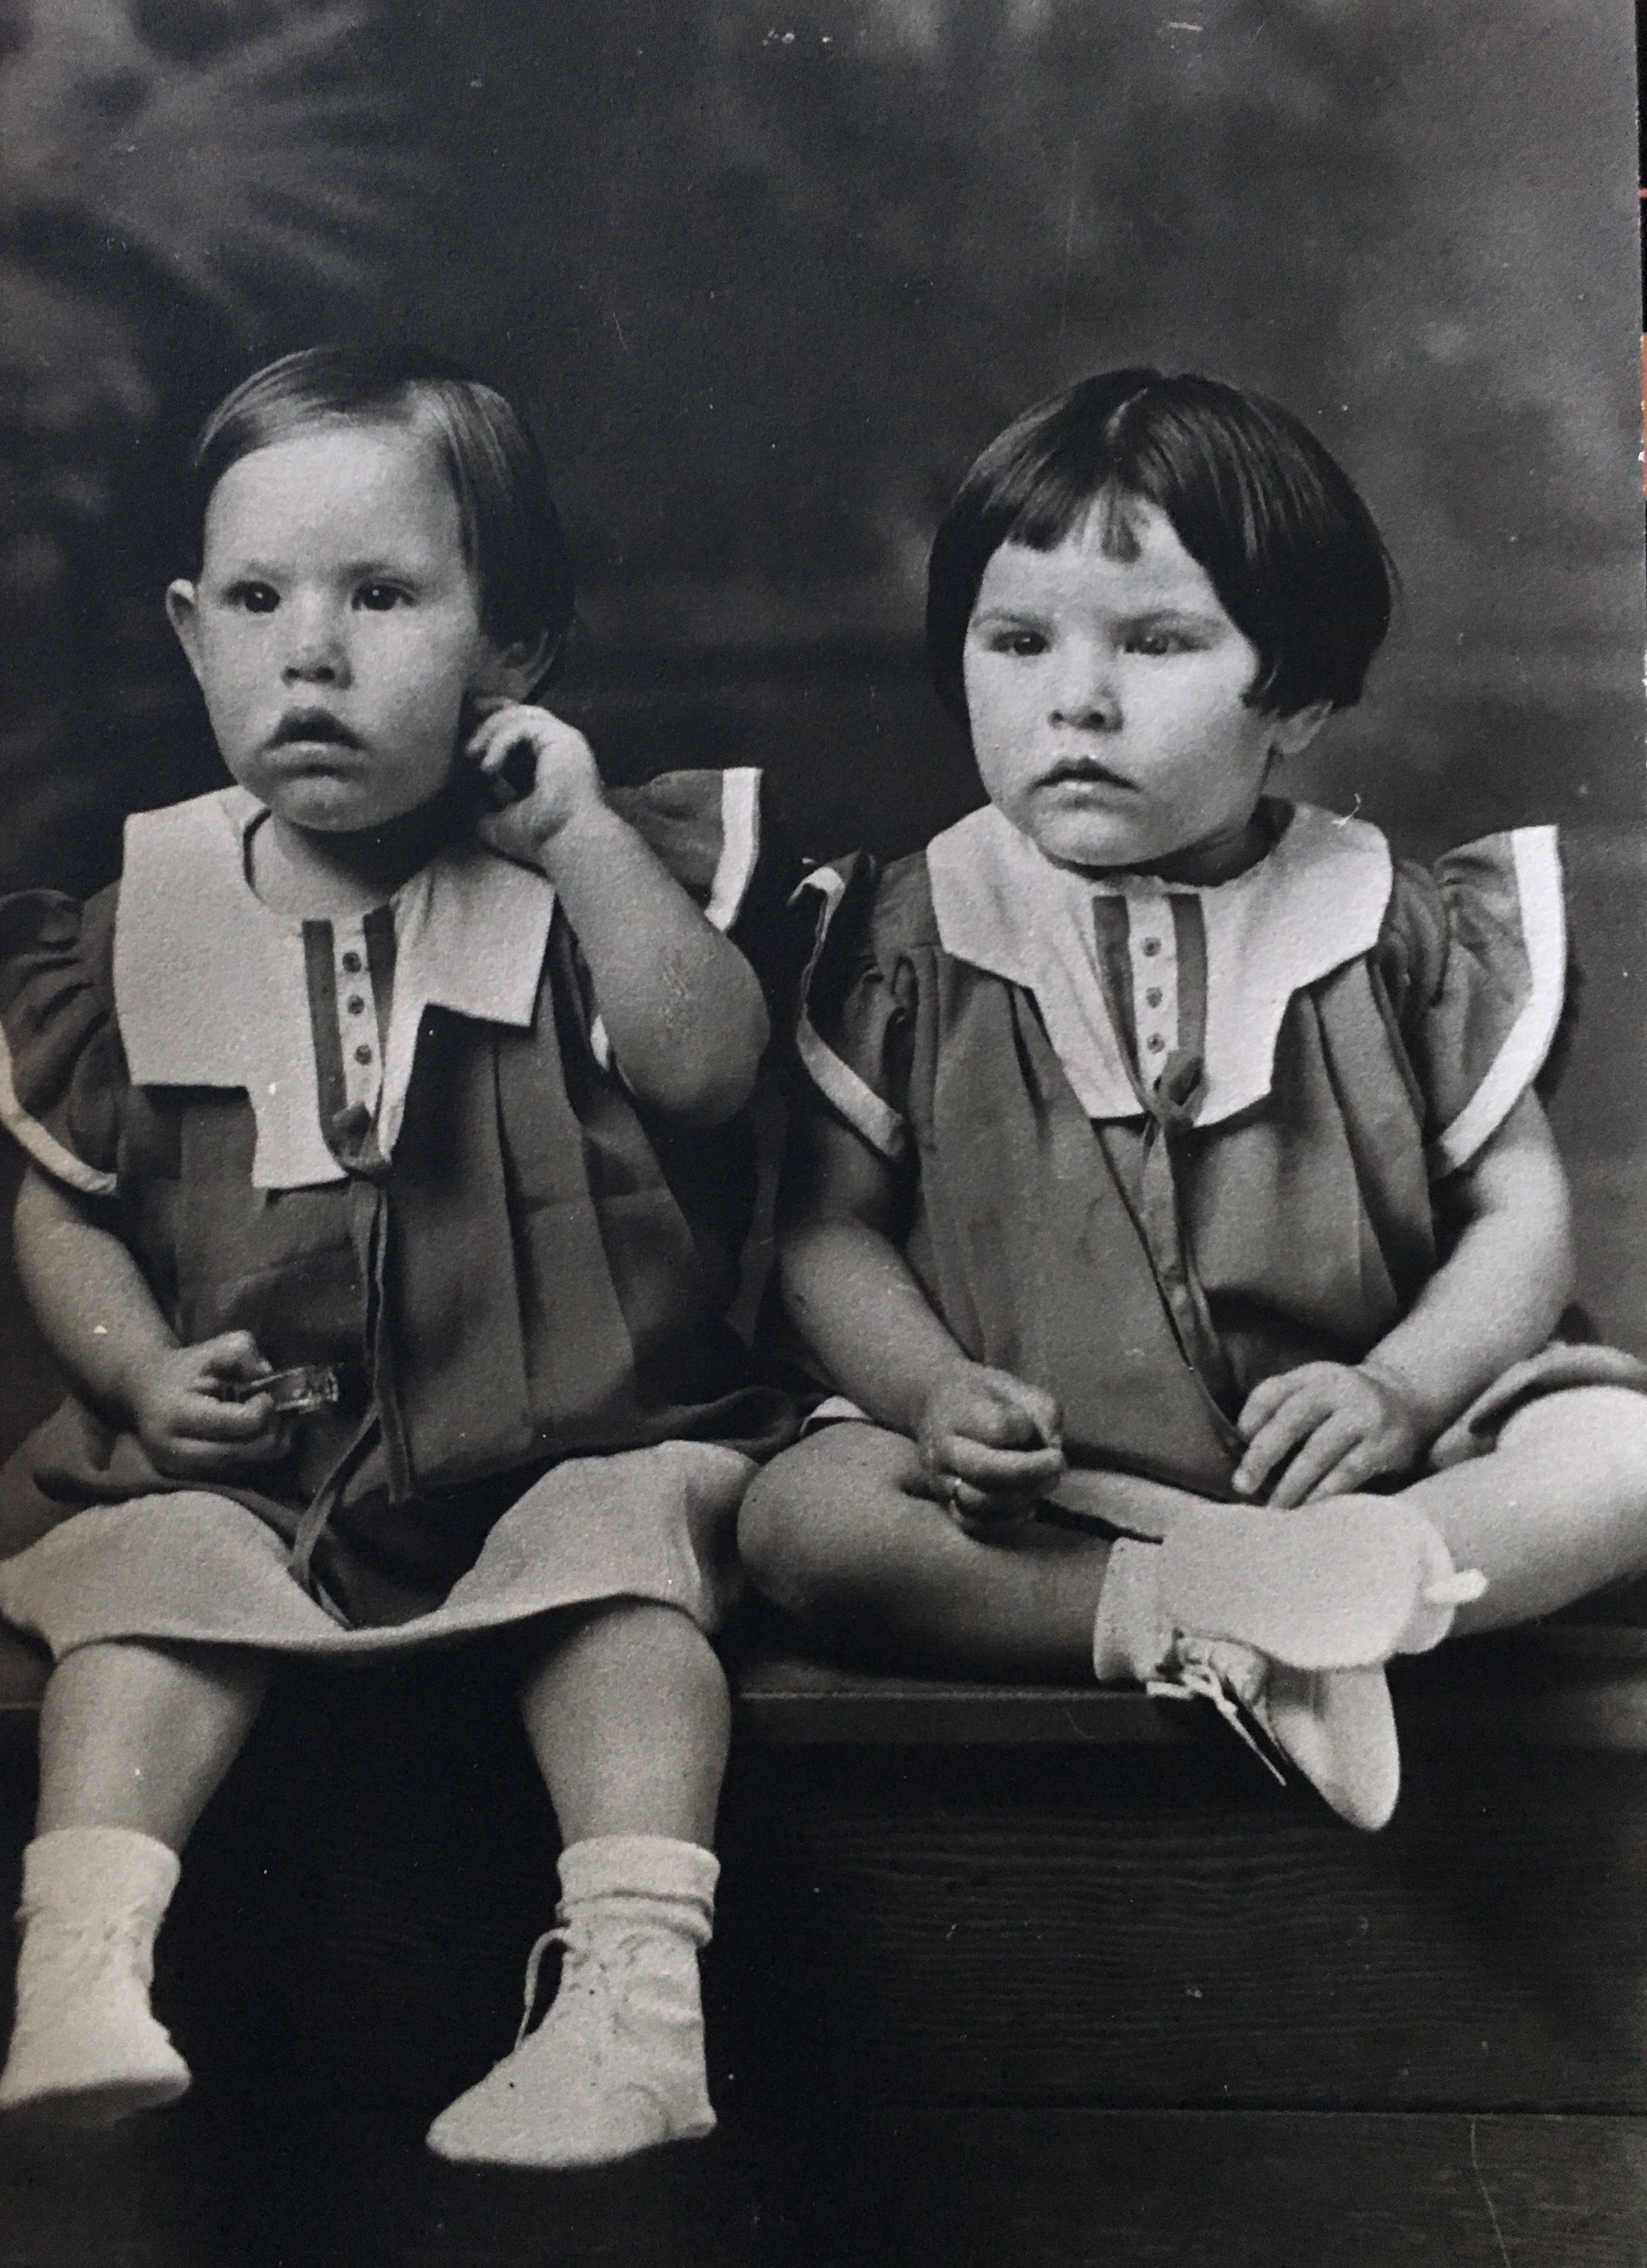 L->R: Twins, Dolores and Dora Diaz. Dora is my Mother-in-Law, Riverside (old Rubidoux), California, c. 1934, Depression Era